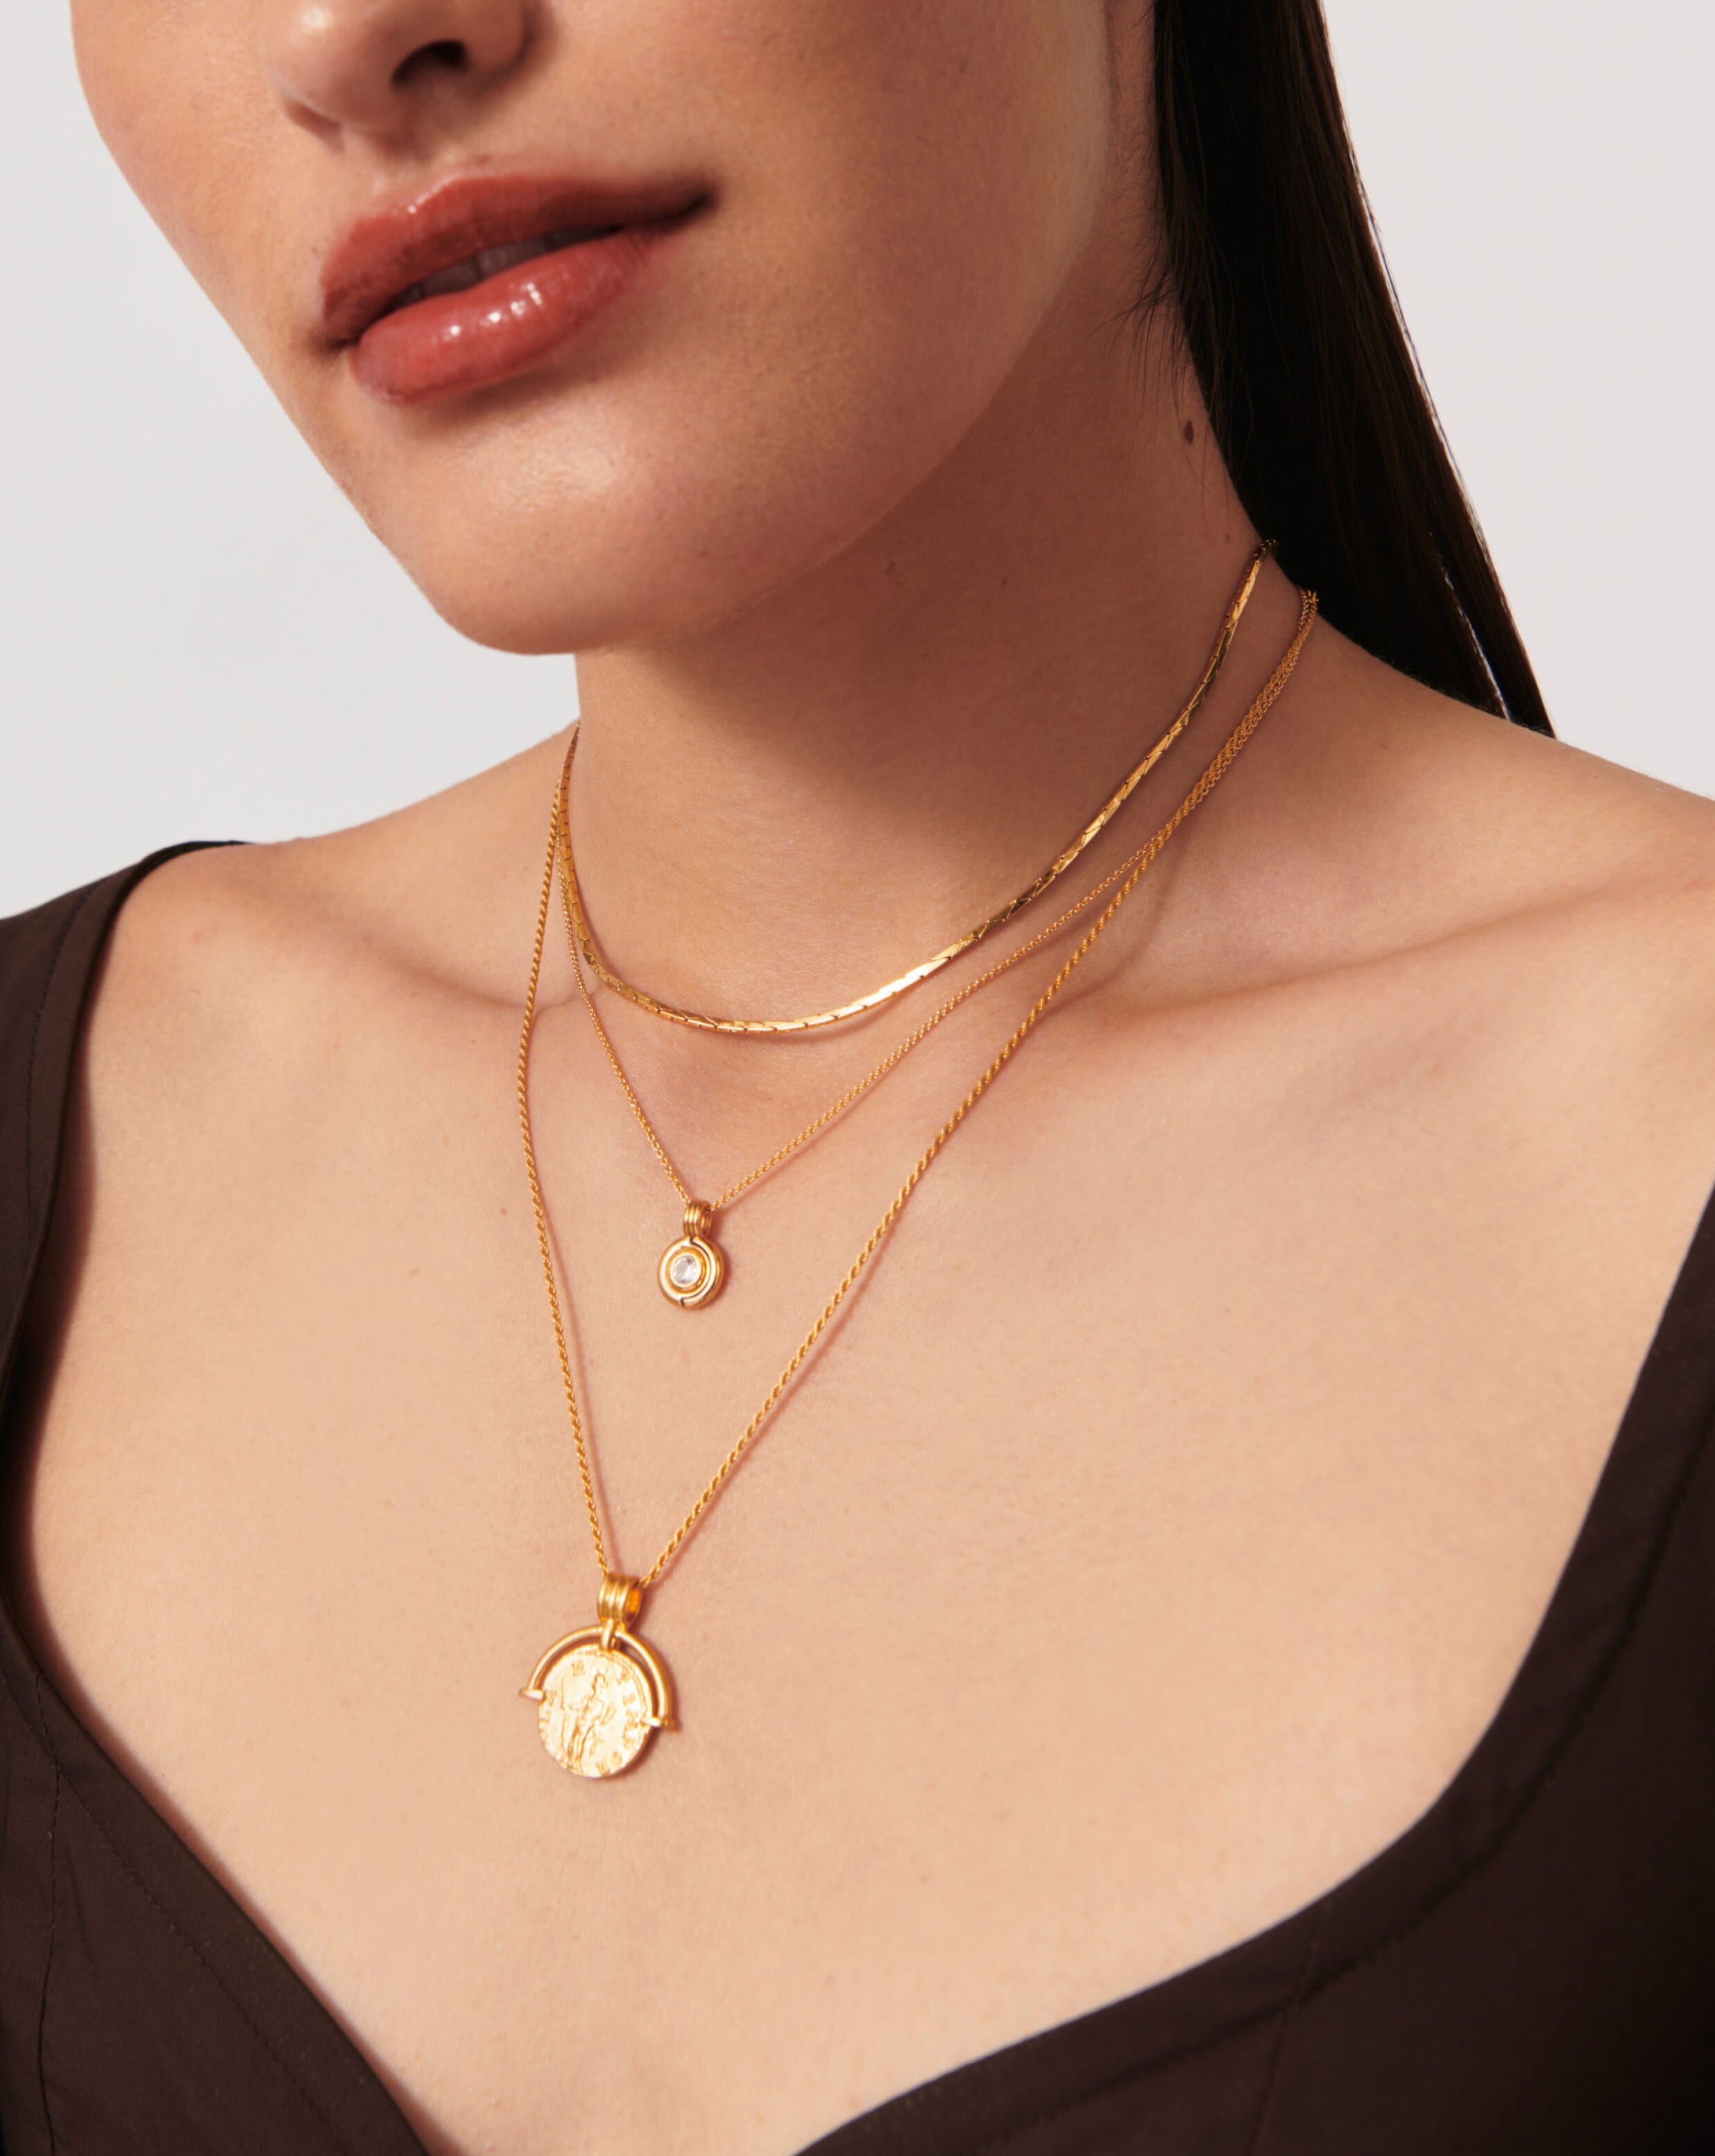 18ct Gold Choker Necklace For Women - Disc Necklace